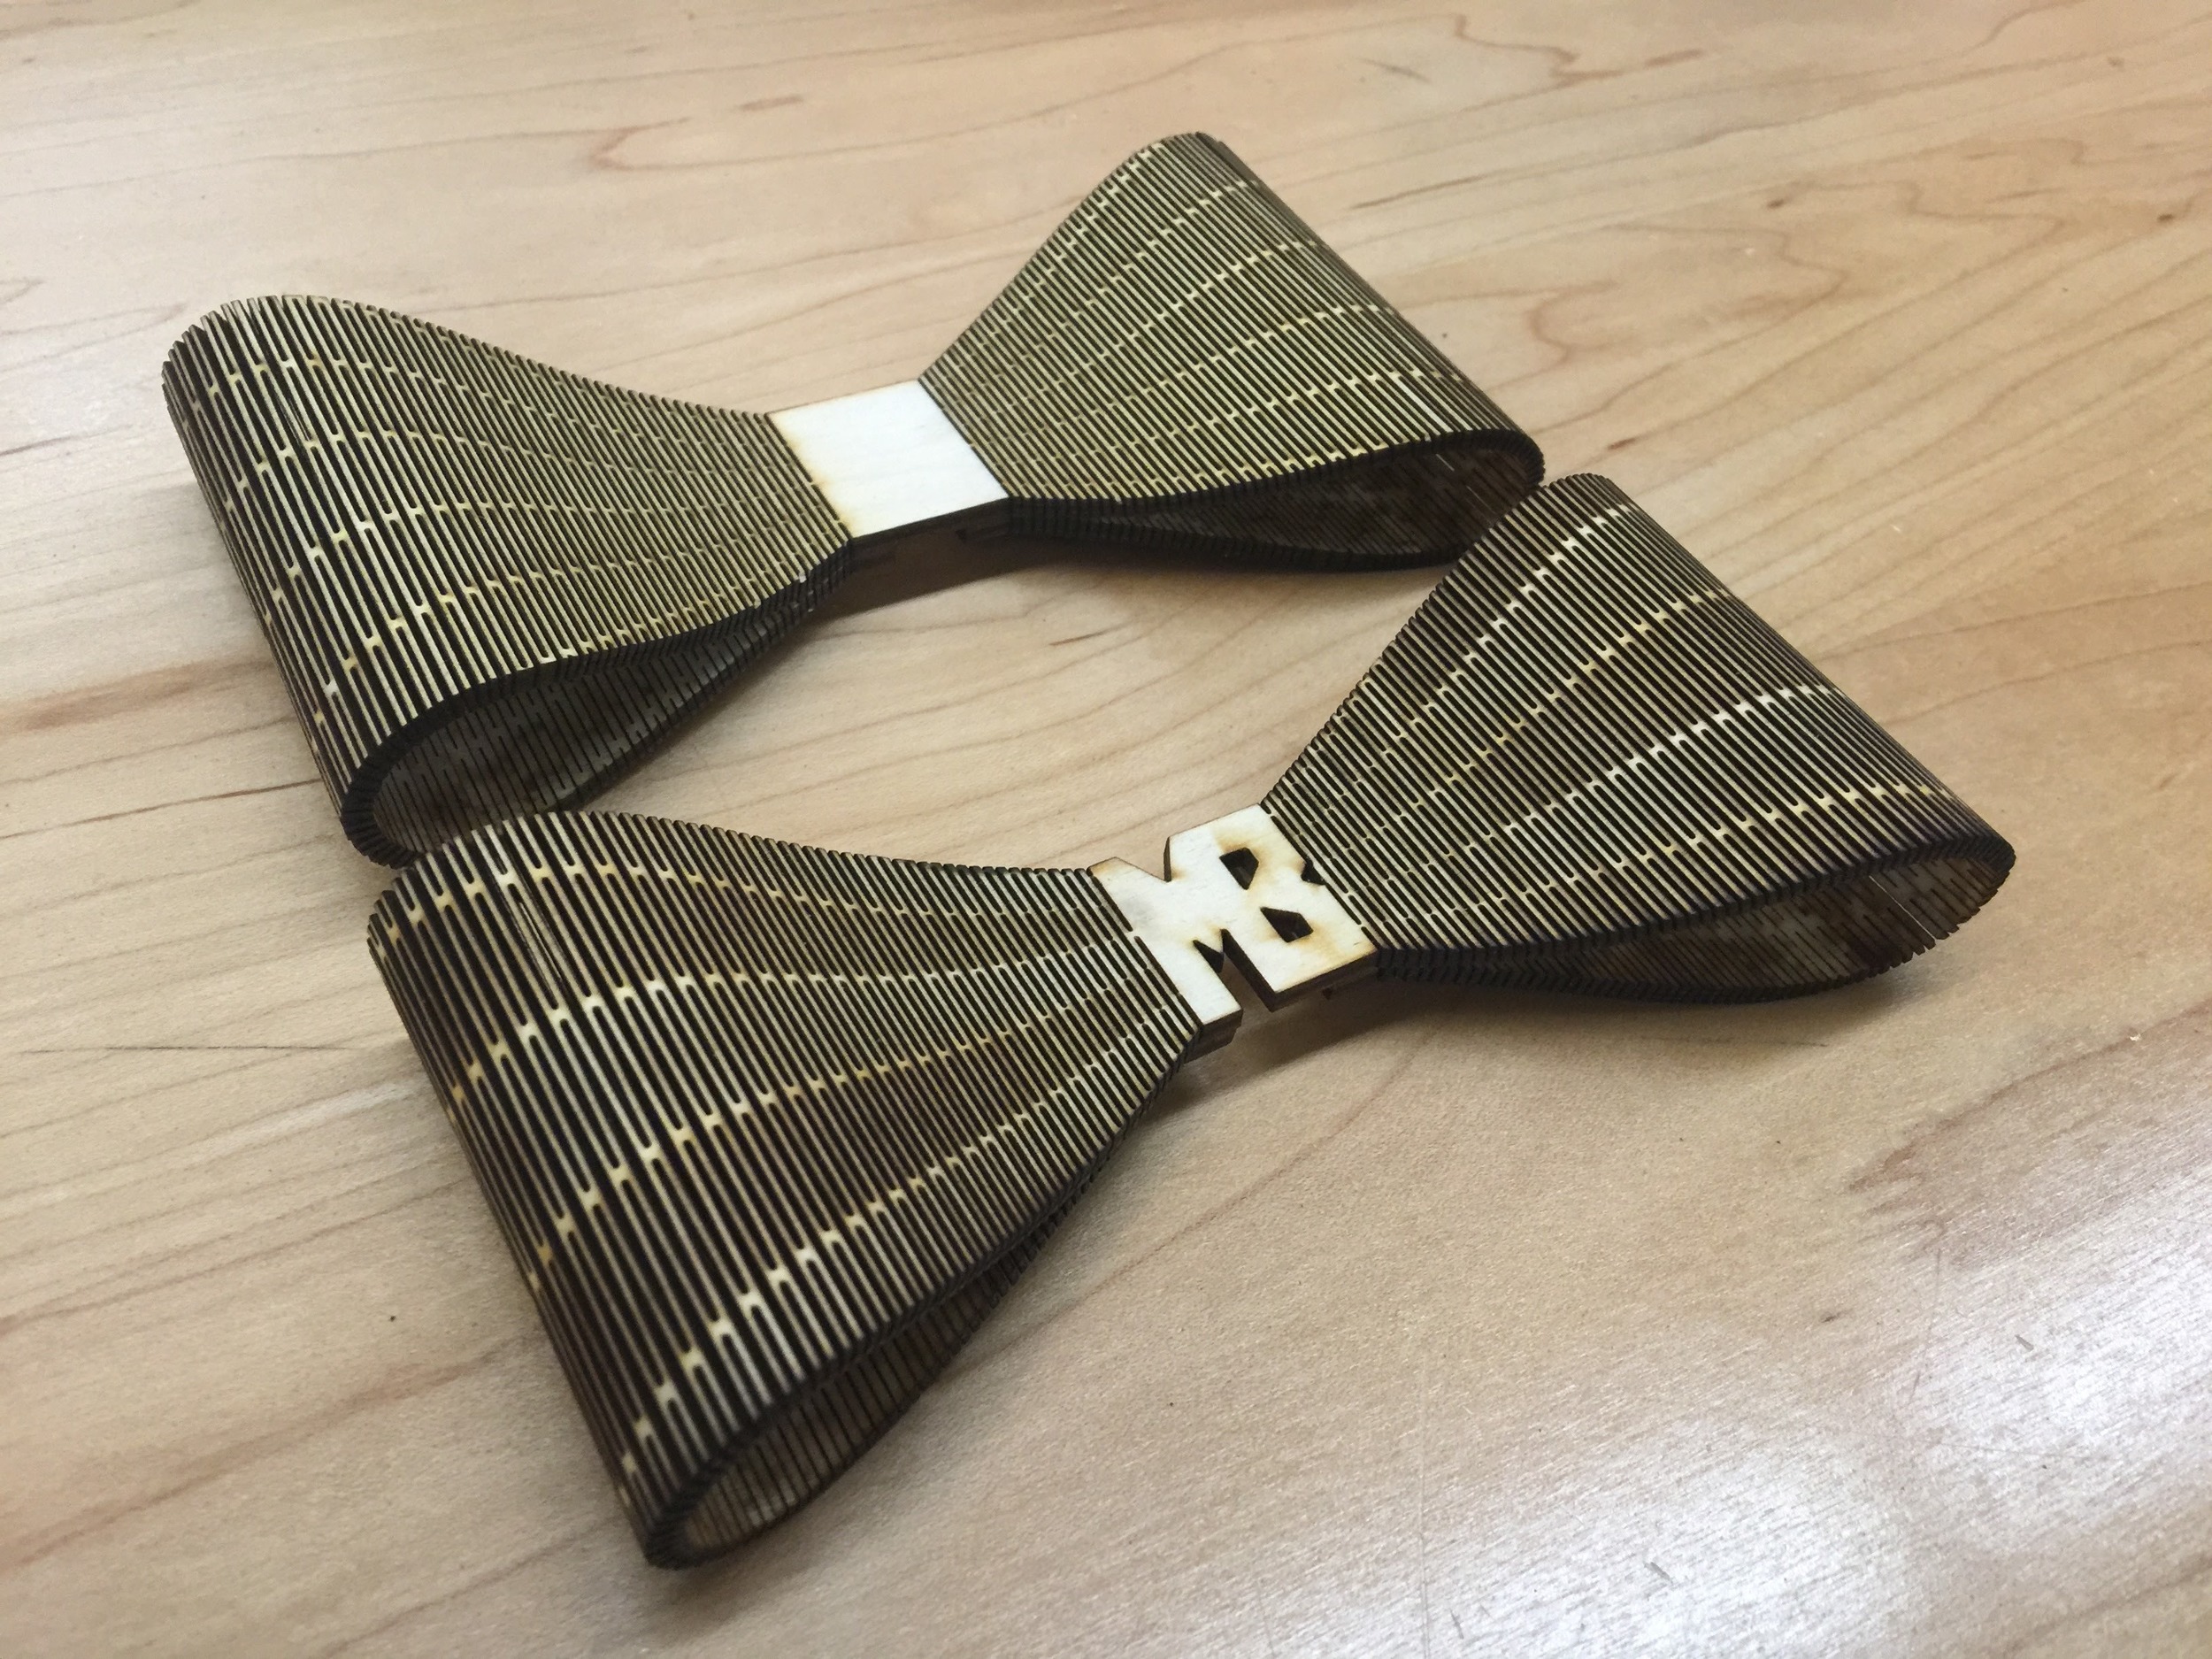 early prototypes of the "living hinge" wood bow tie design